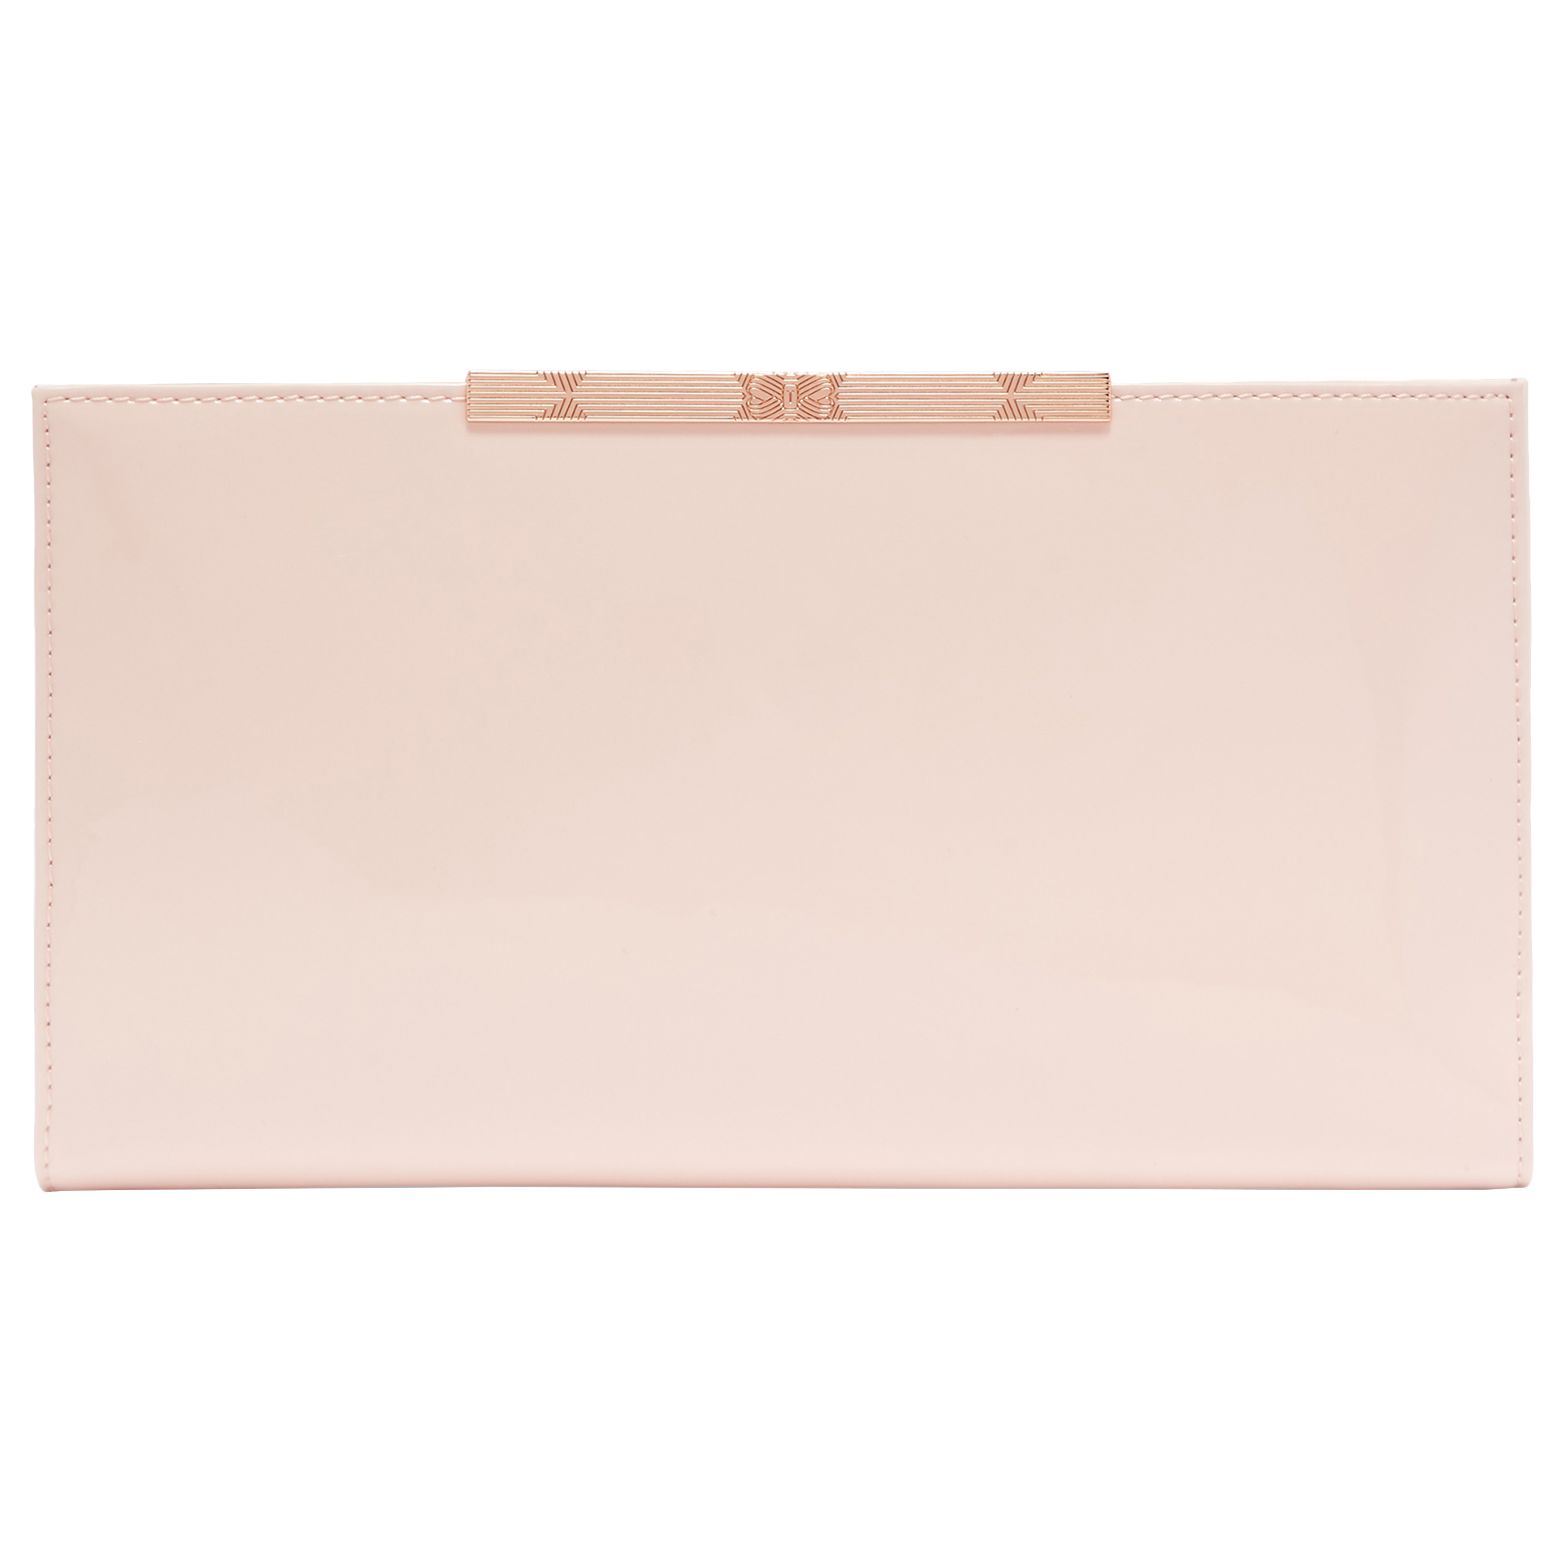 Ted Baker Kimberl Leather Travel Wallet, Light Pink